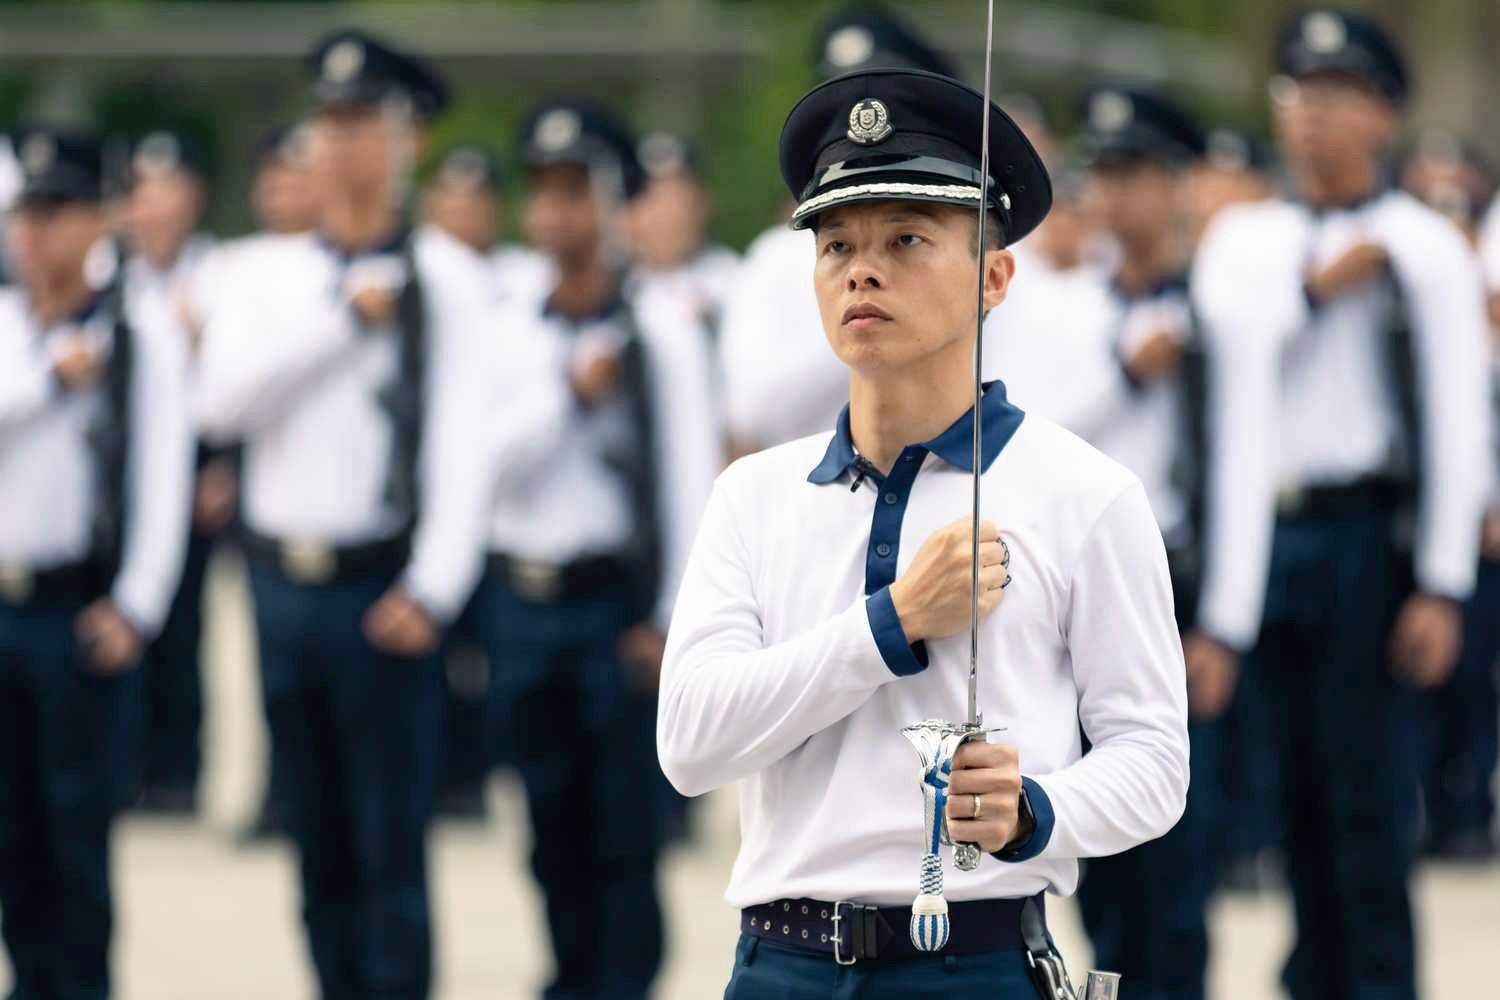 photo of DAC Tan wearing a white long sleeve rehearsal attire, holding a sword and taking the police pledge, with his fist clenched on his left chest